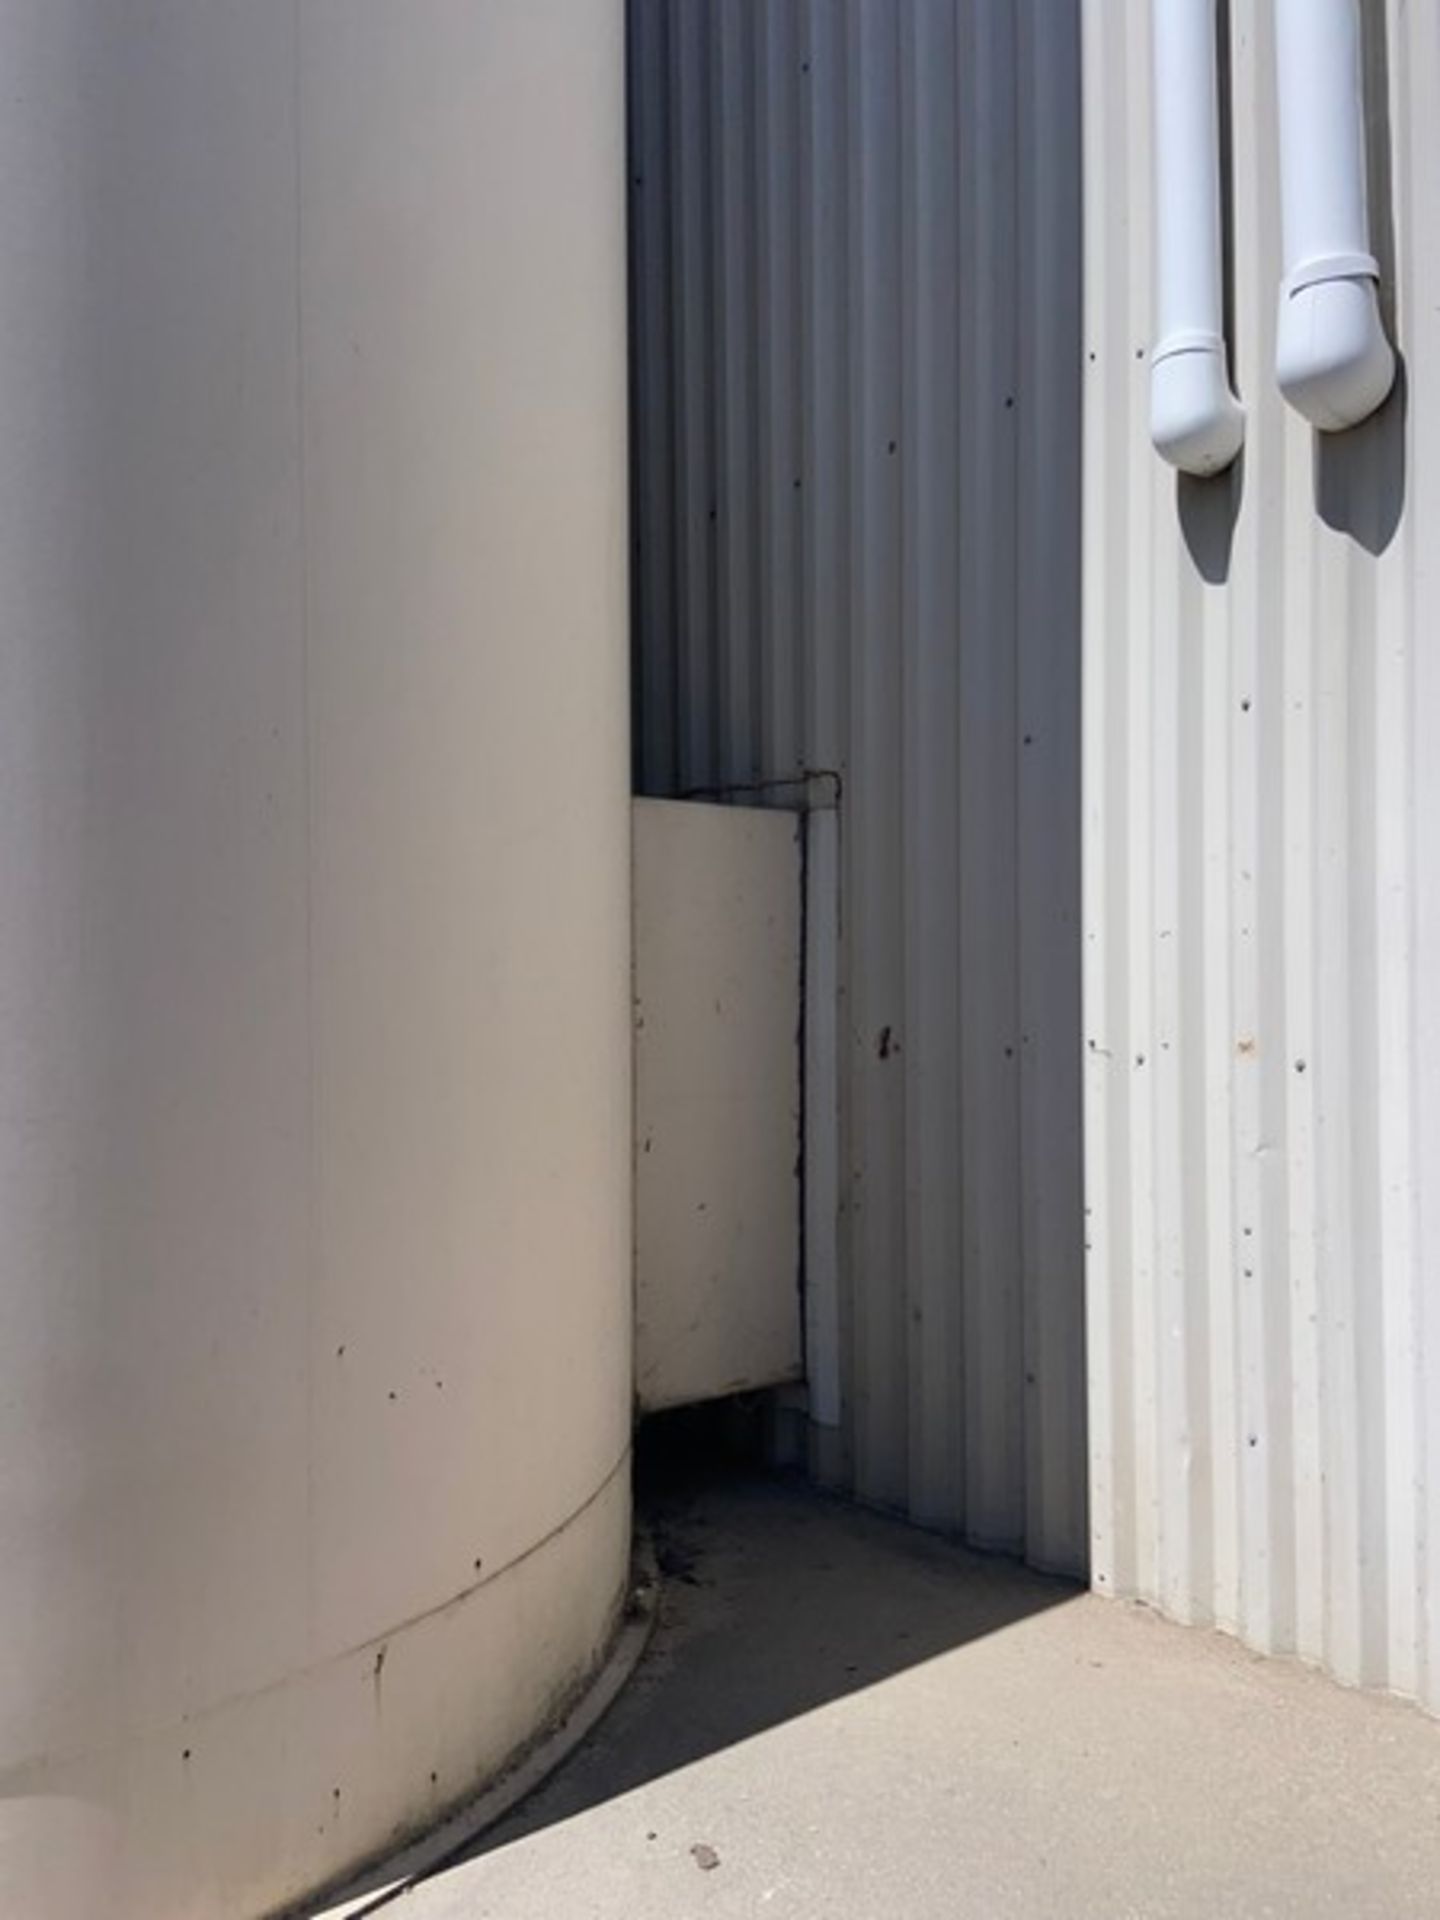 Mueller 40,000 Gal. S/S Jacketed Silo, with Man Door & Horizontal Agitation (LOCATED IN MANTECA, - Image 3 of 15